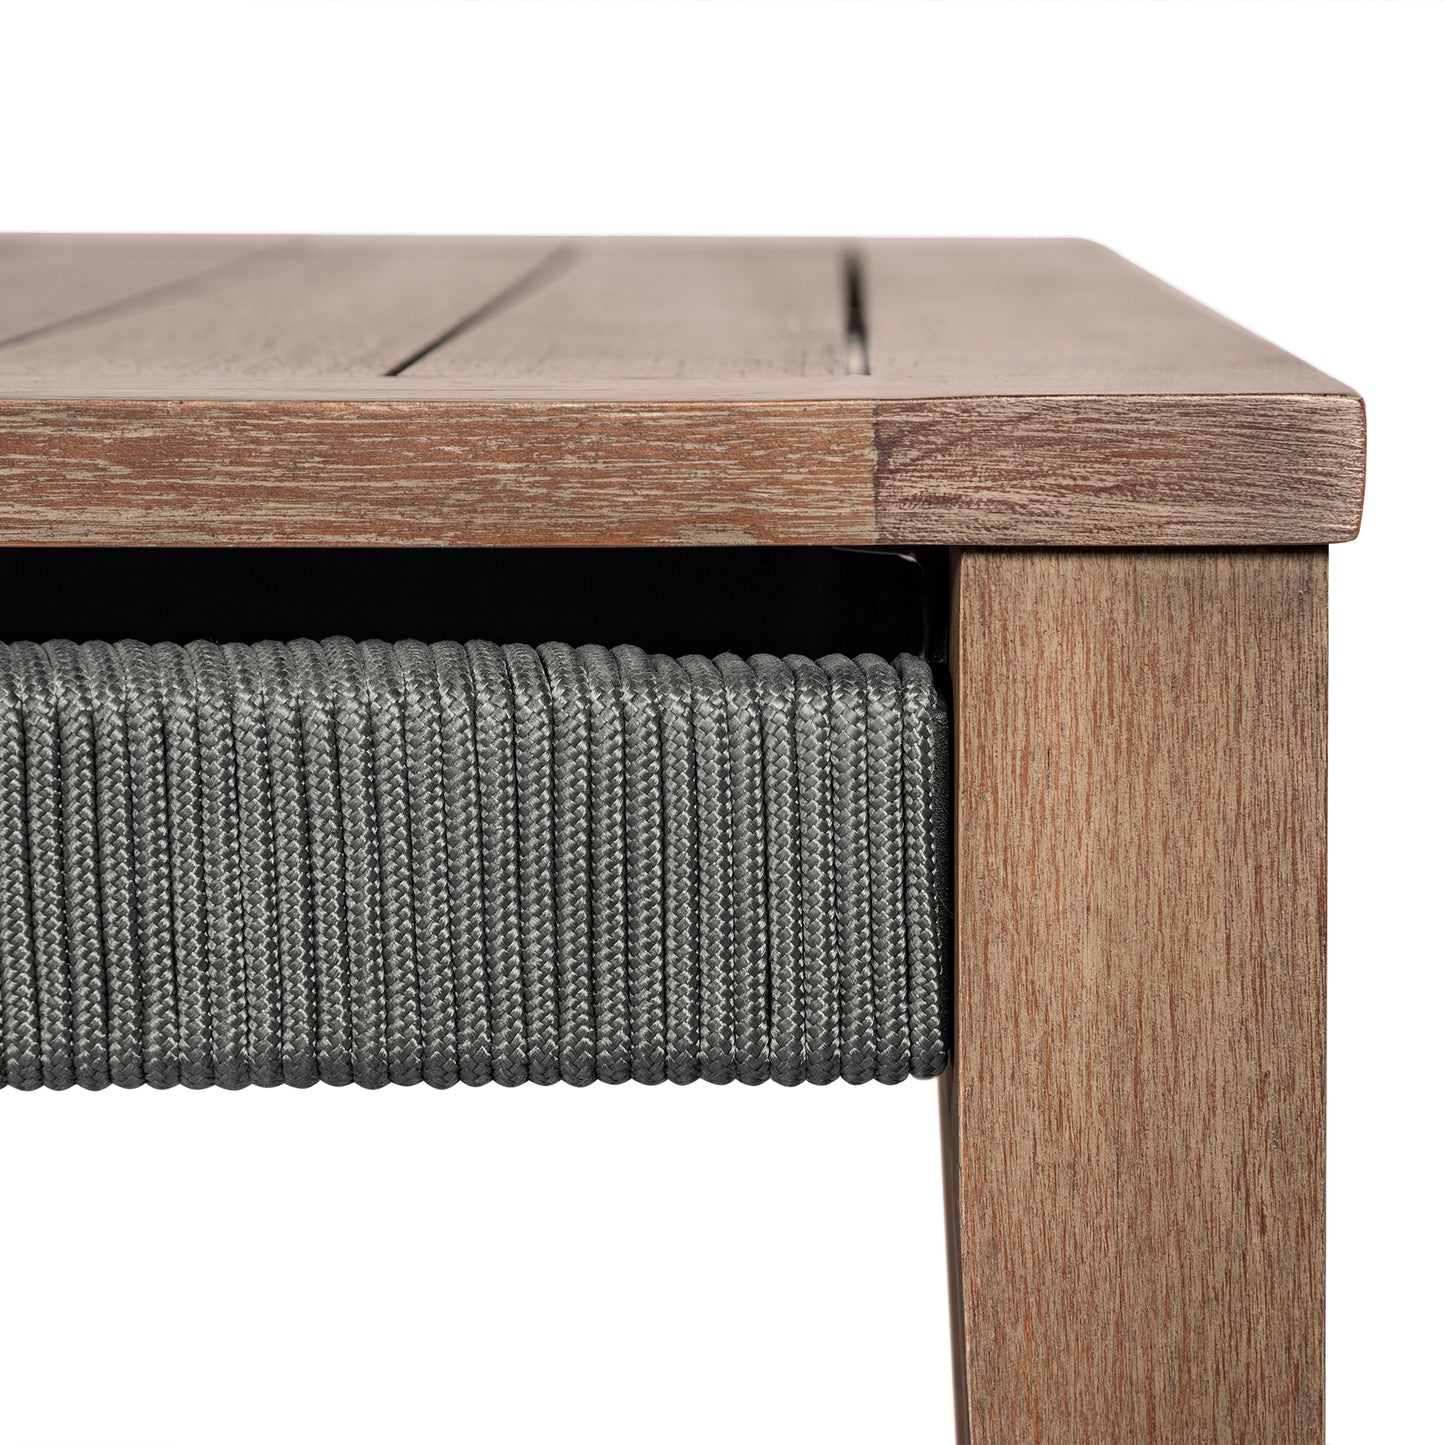 Orbit Square Outdoor Patio Coffee Table in Weathered Eucalyptus Wood